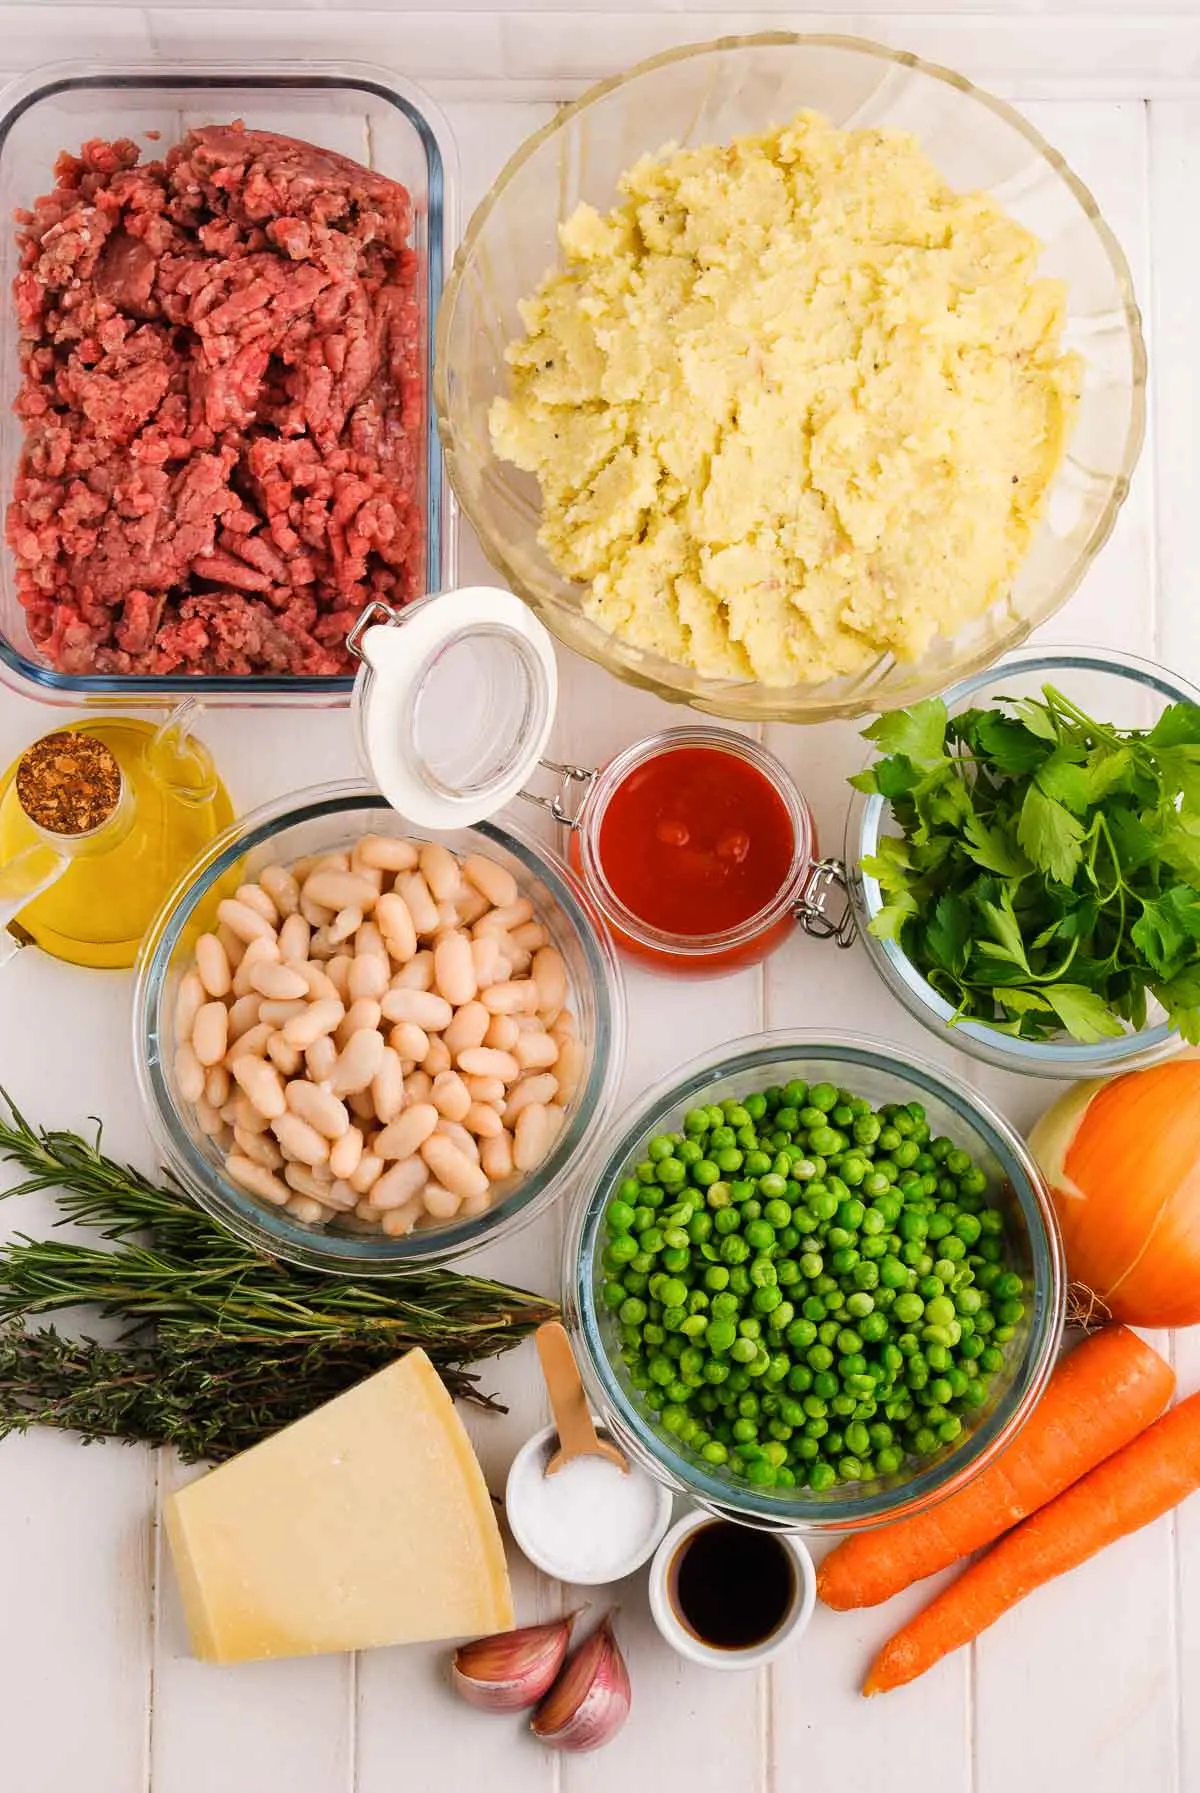 Ingredients to make shepherd's pie with white beans.